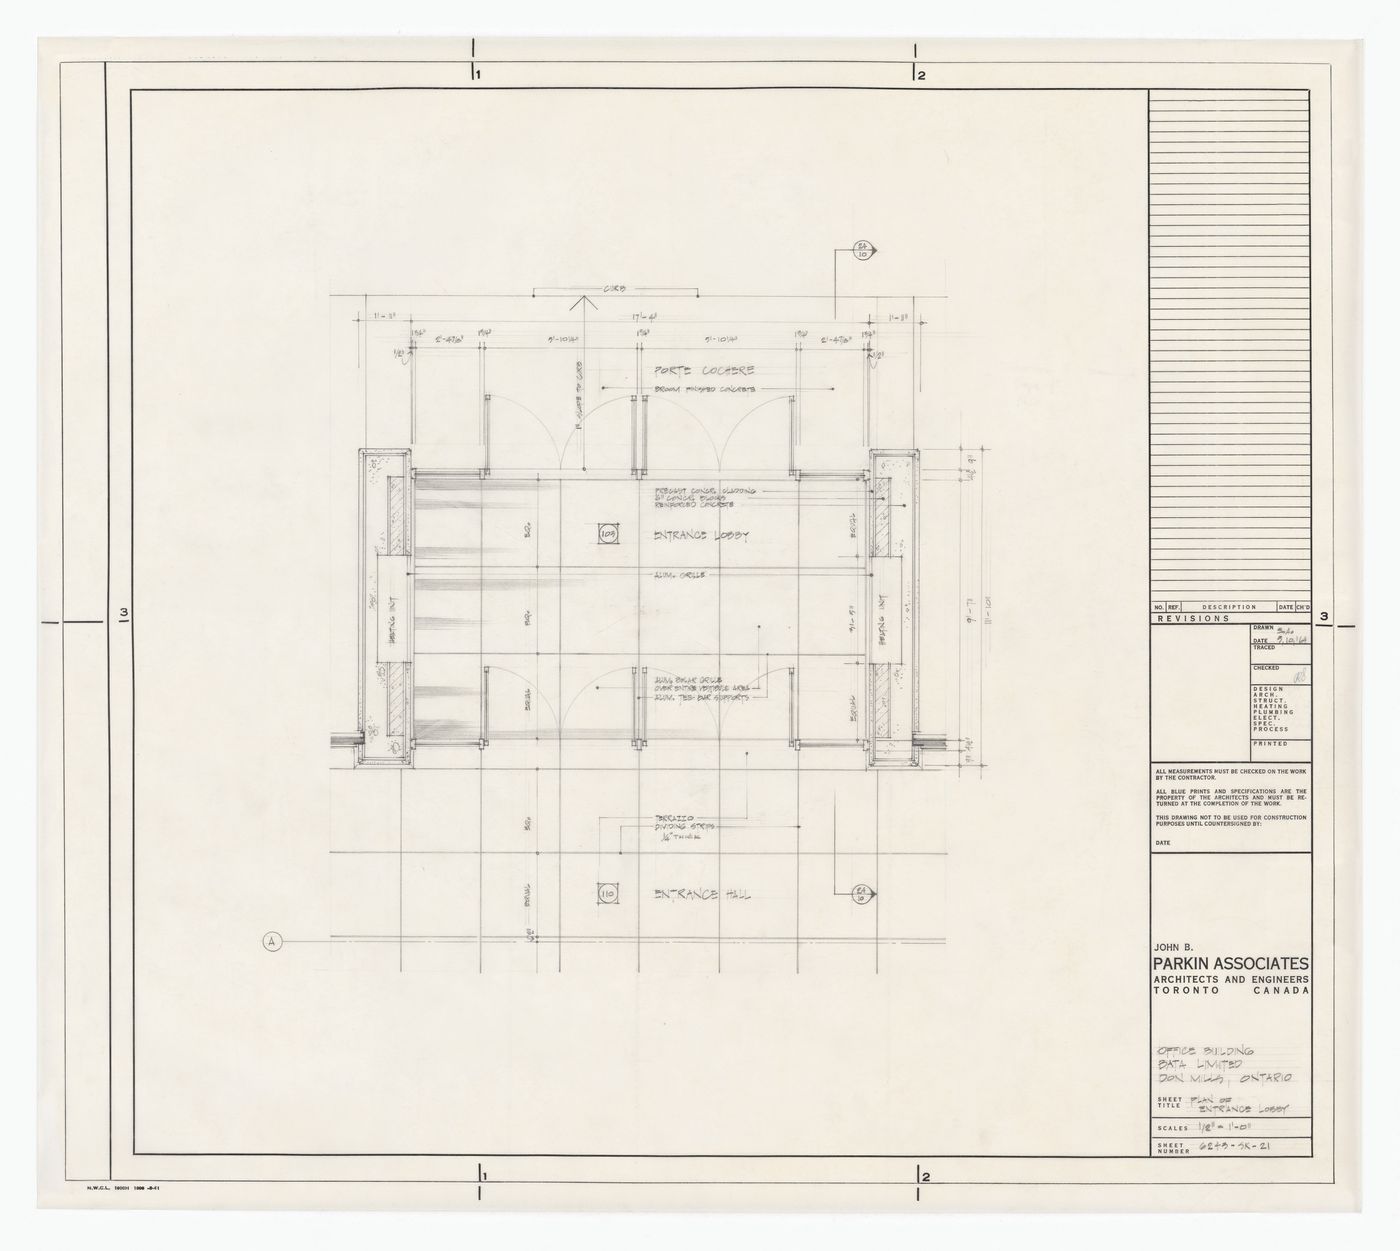 Plan for entrance lobby of Bata Limited Office Building, Don Mills, Ontario